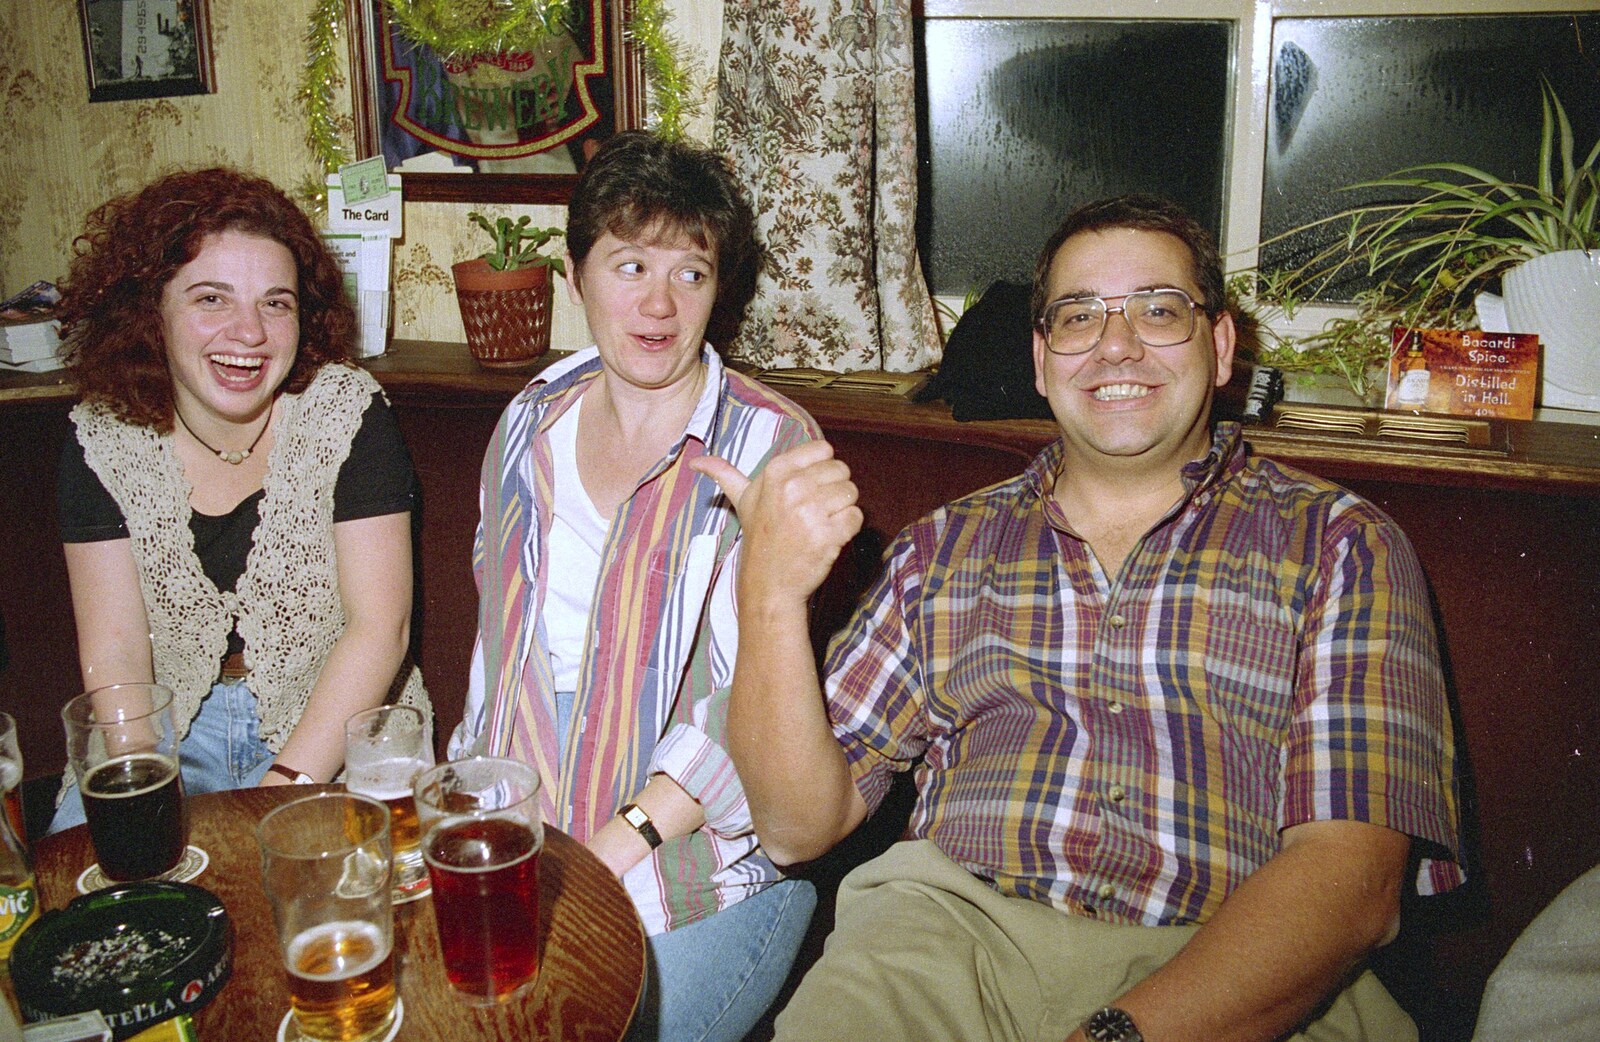 Roger points his thumb at some friends from New Year's Eve in the Swan Inn, Brome, Suffolk - 31st December 1995